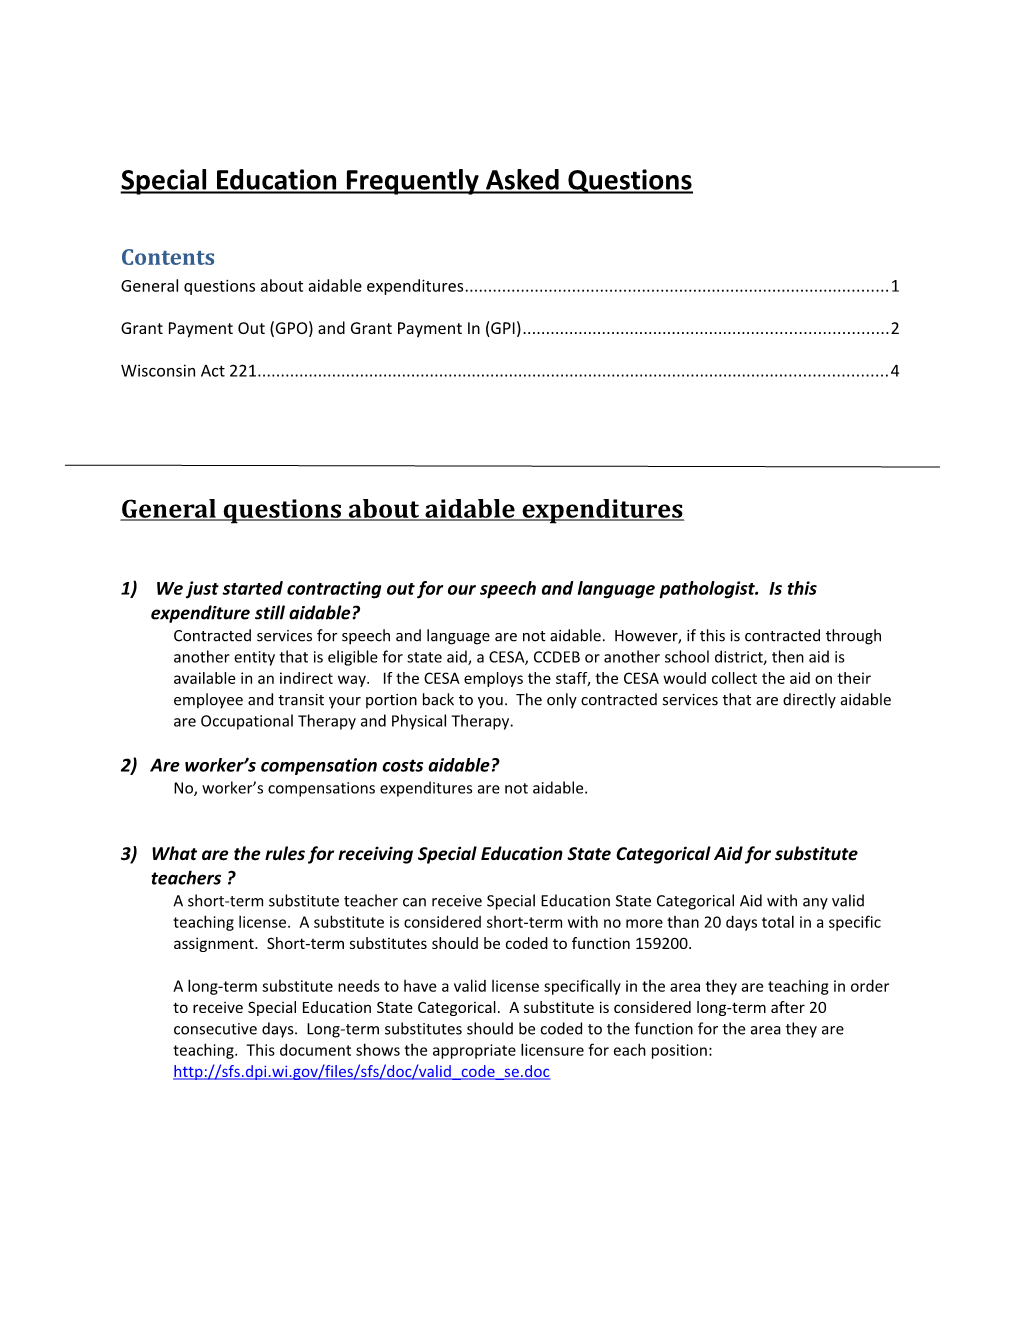 Special Education Finance Frequently Asked Questions